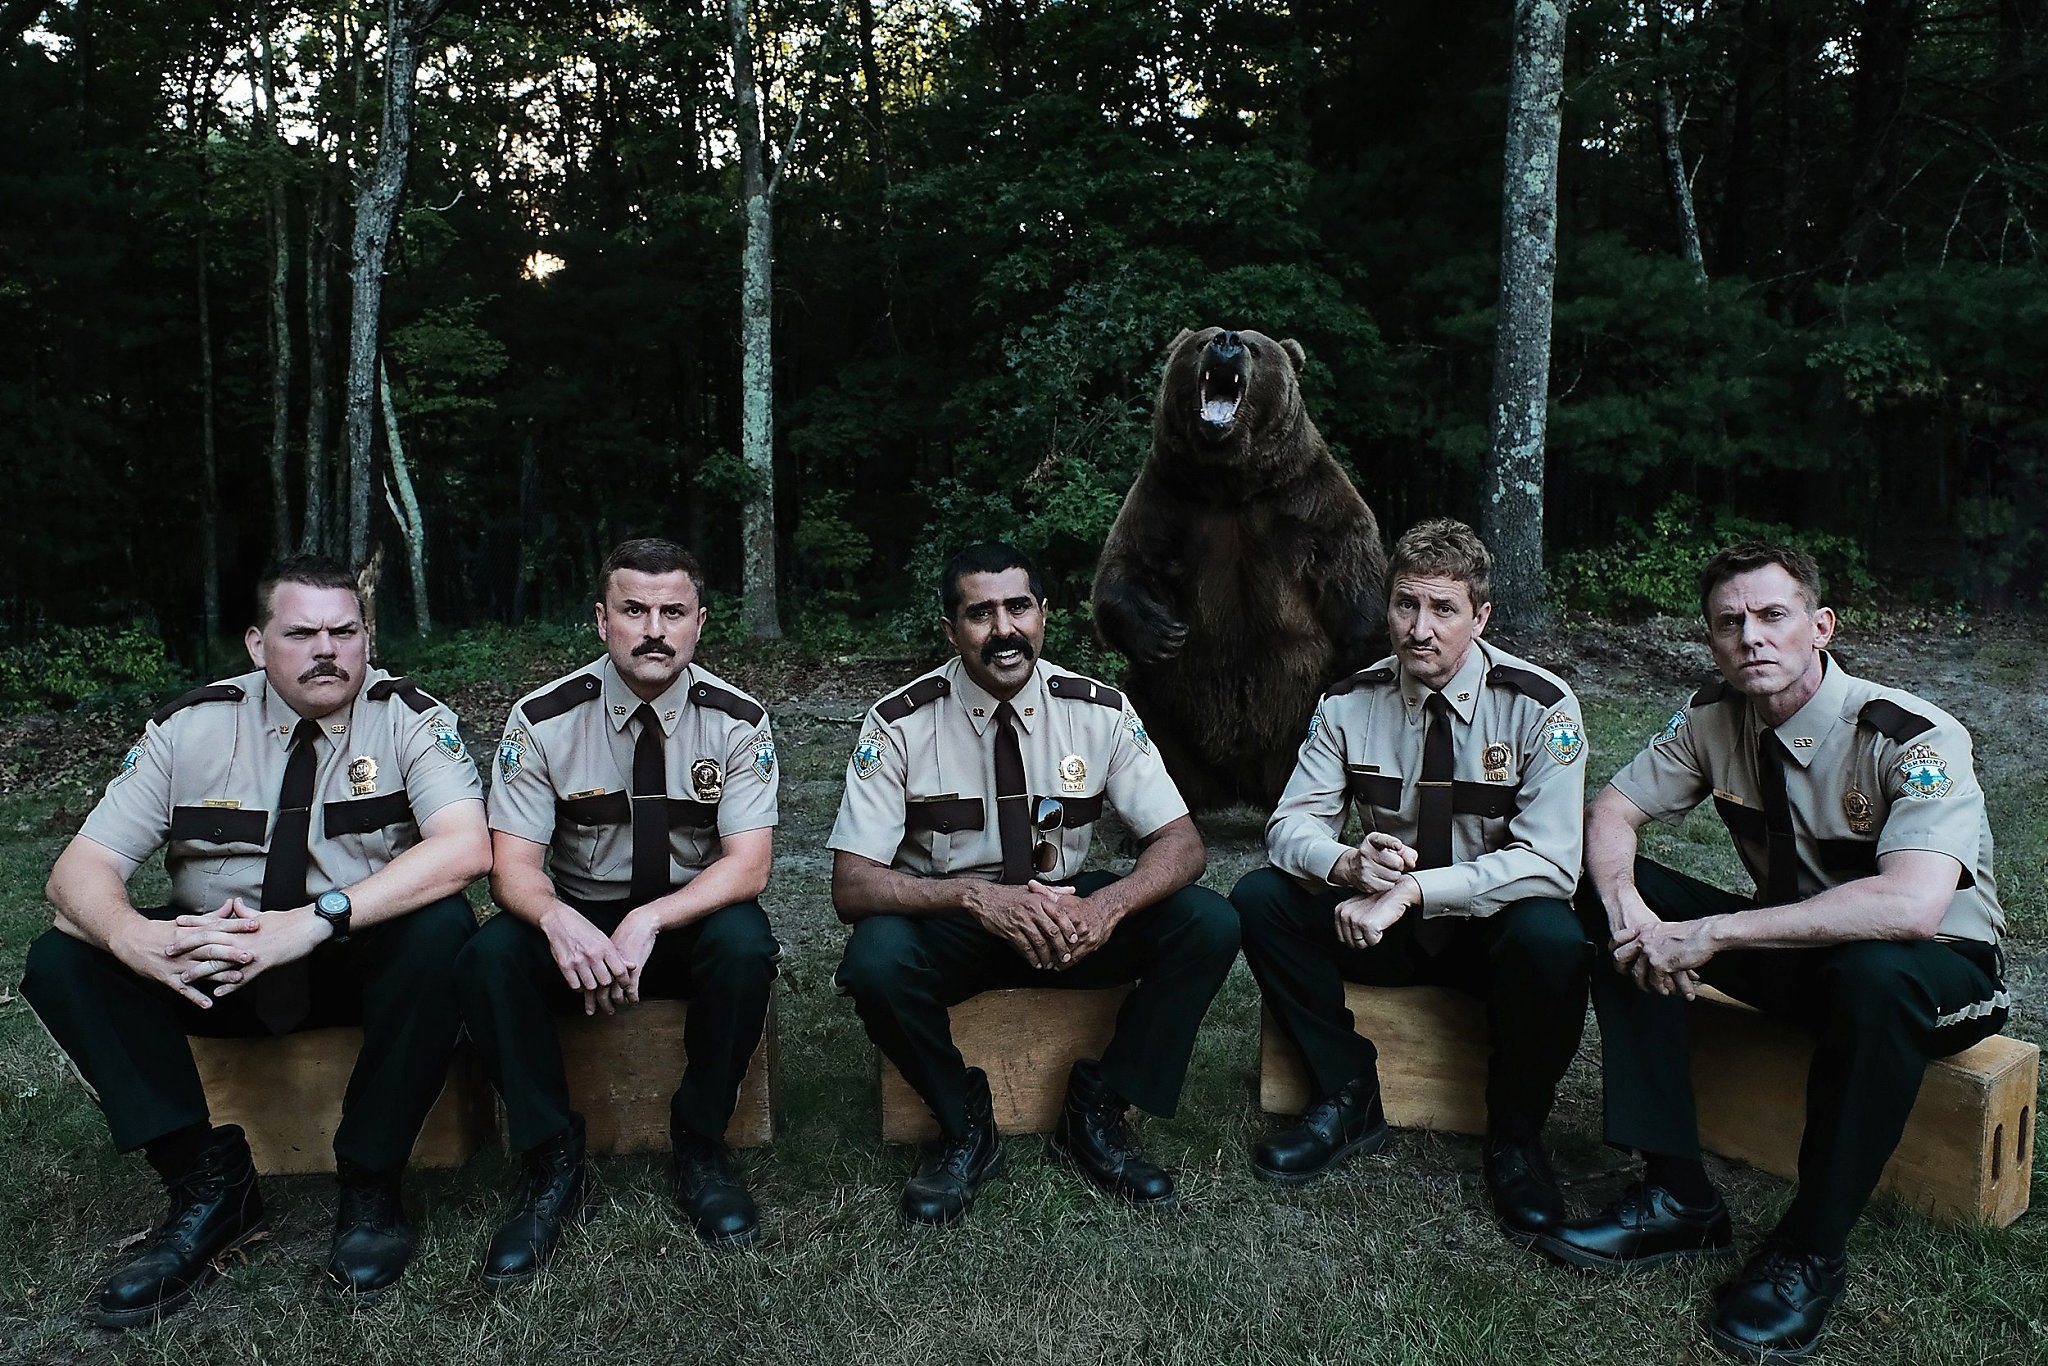 Super Troopers' stars feel super about 'Animal House' and Ch...